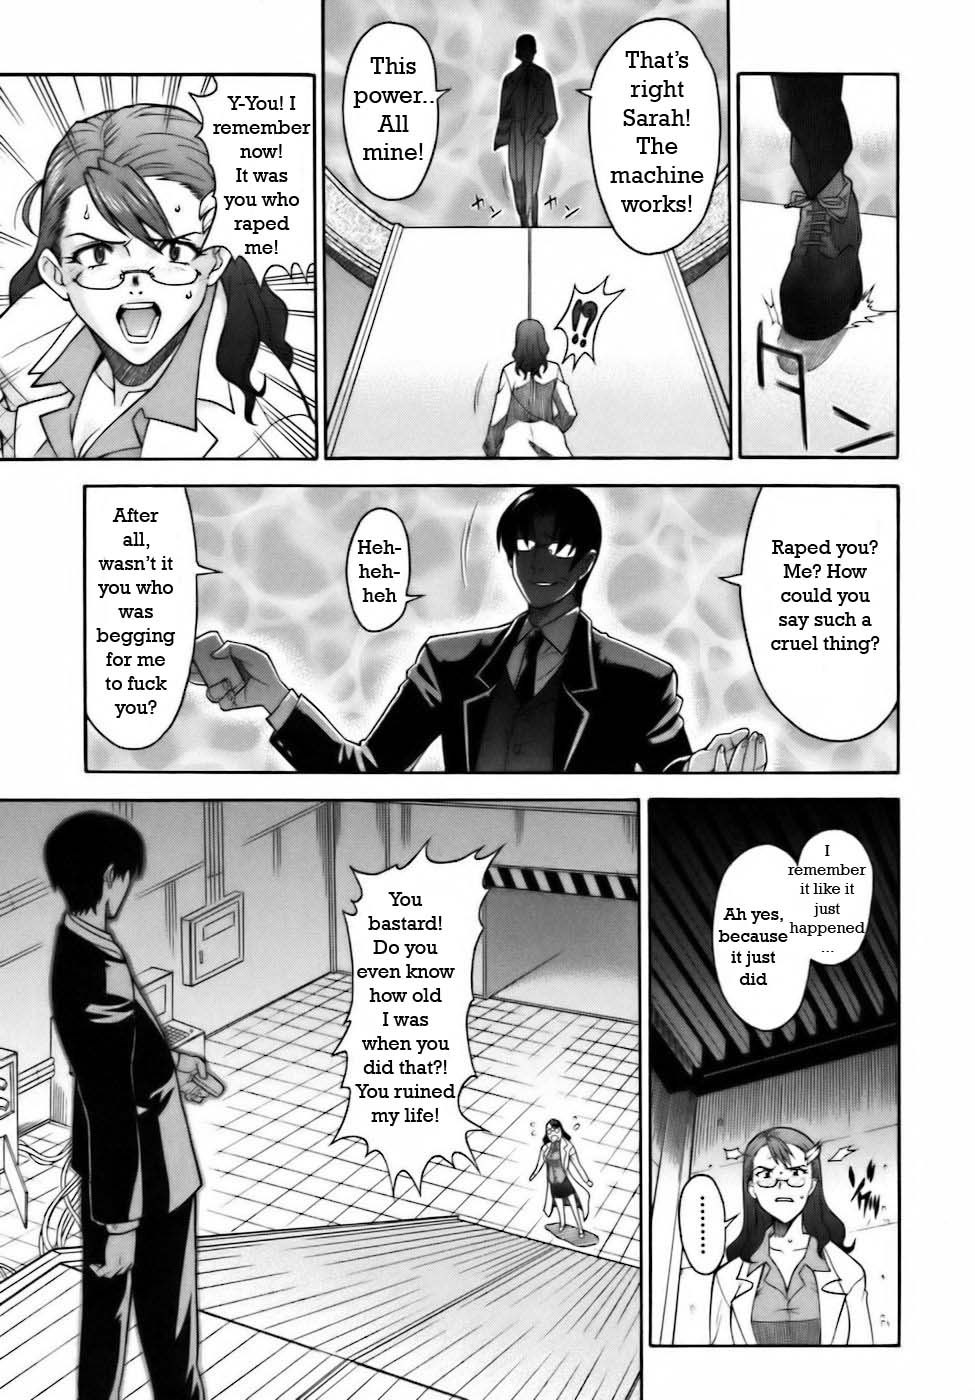 Time Master Two by Shinkai     Part 2 of 2        Part 1 Sad there isn’t